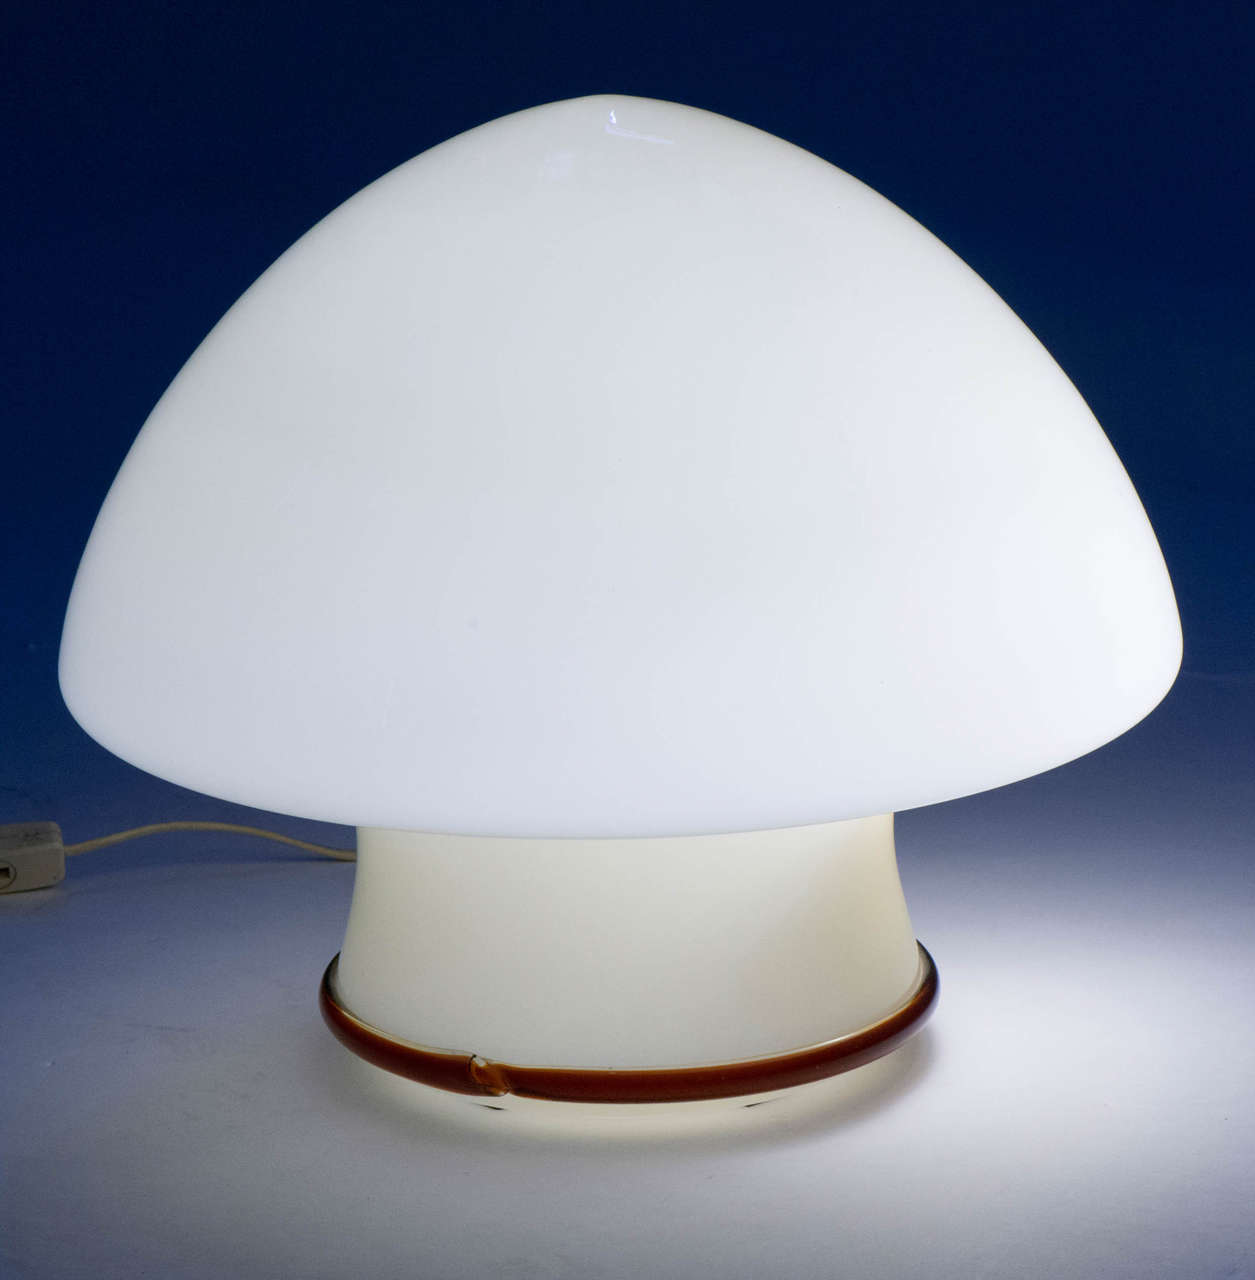 Murano glass table light.
Cream colored glass with crimson colored band on lower base,
Italy, circa 1965
Measures: 40 cm high x 42 cm diameter.